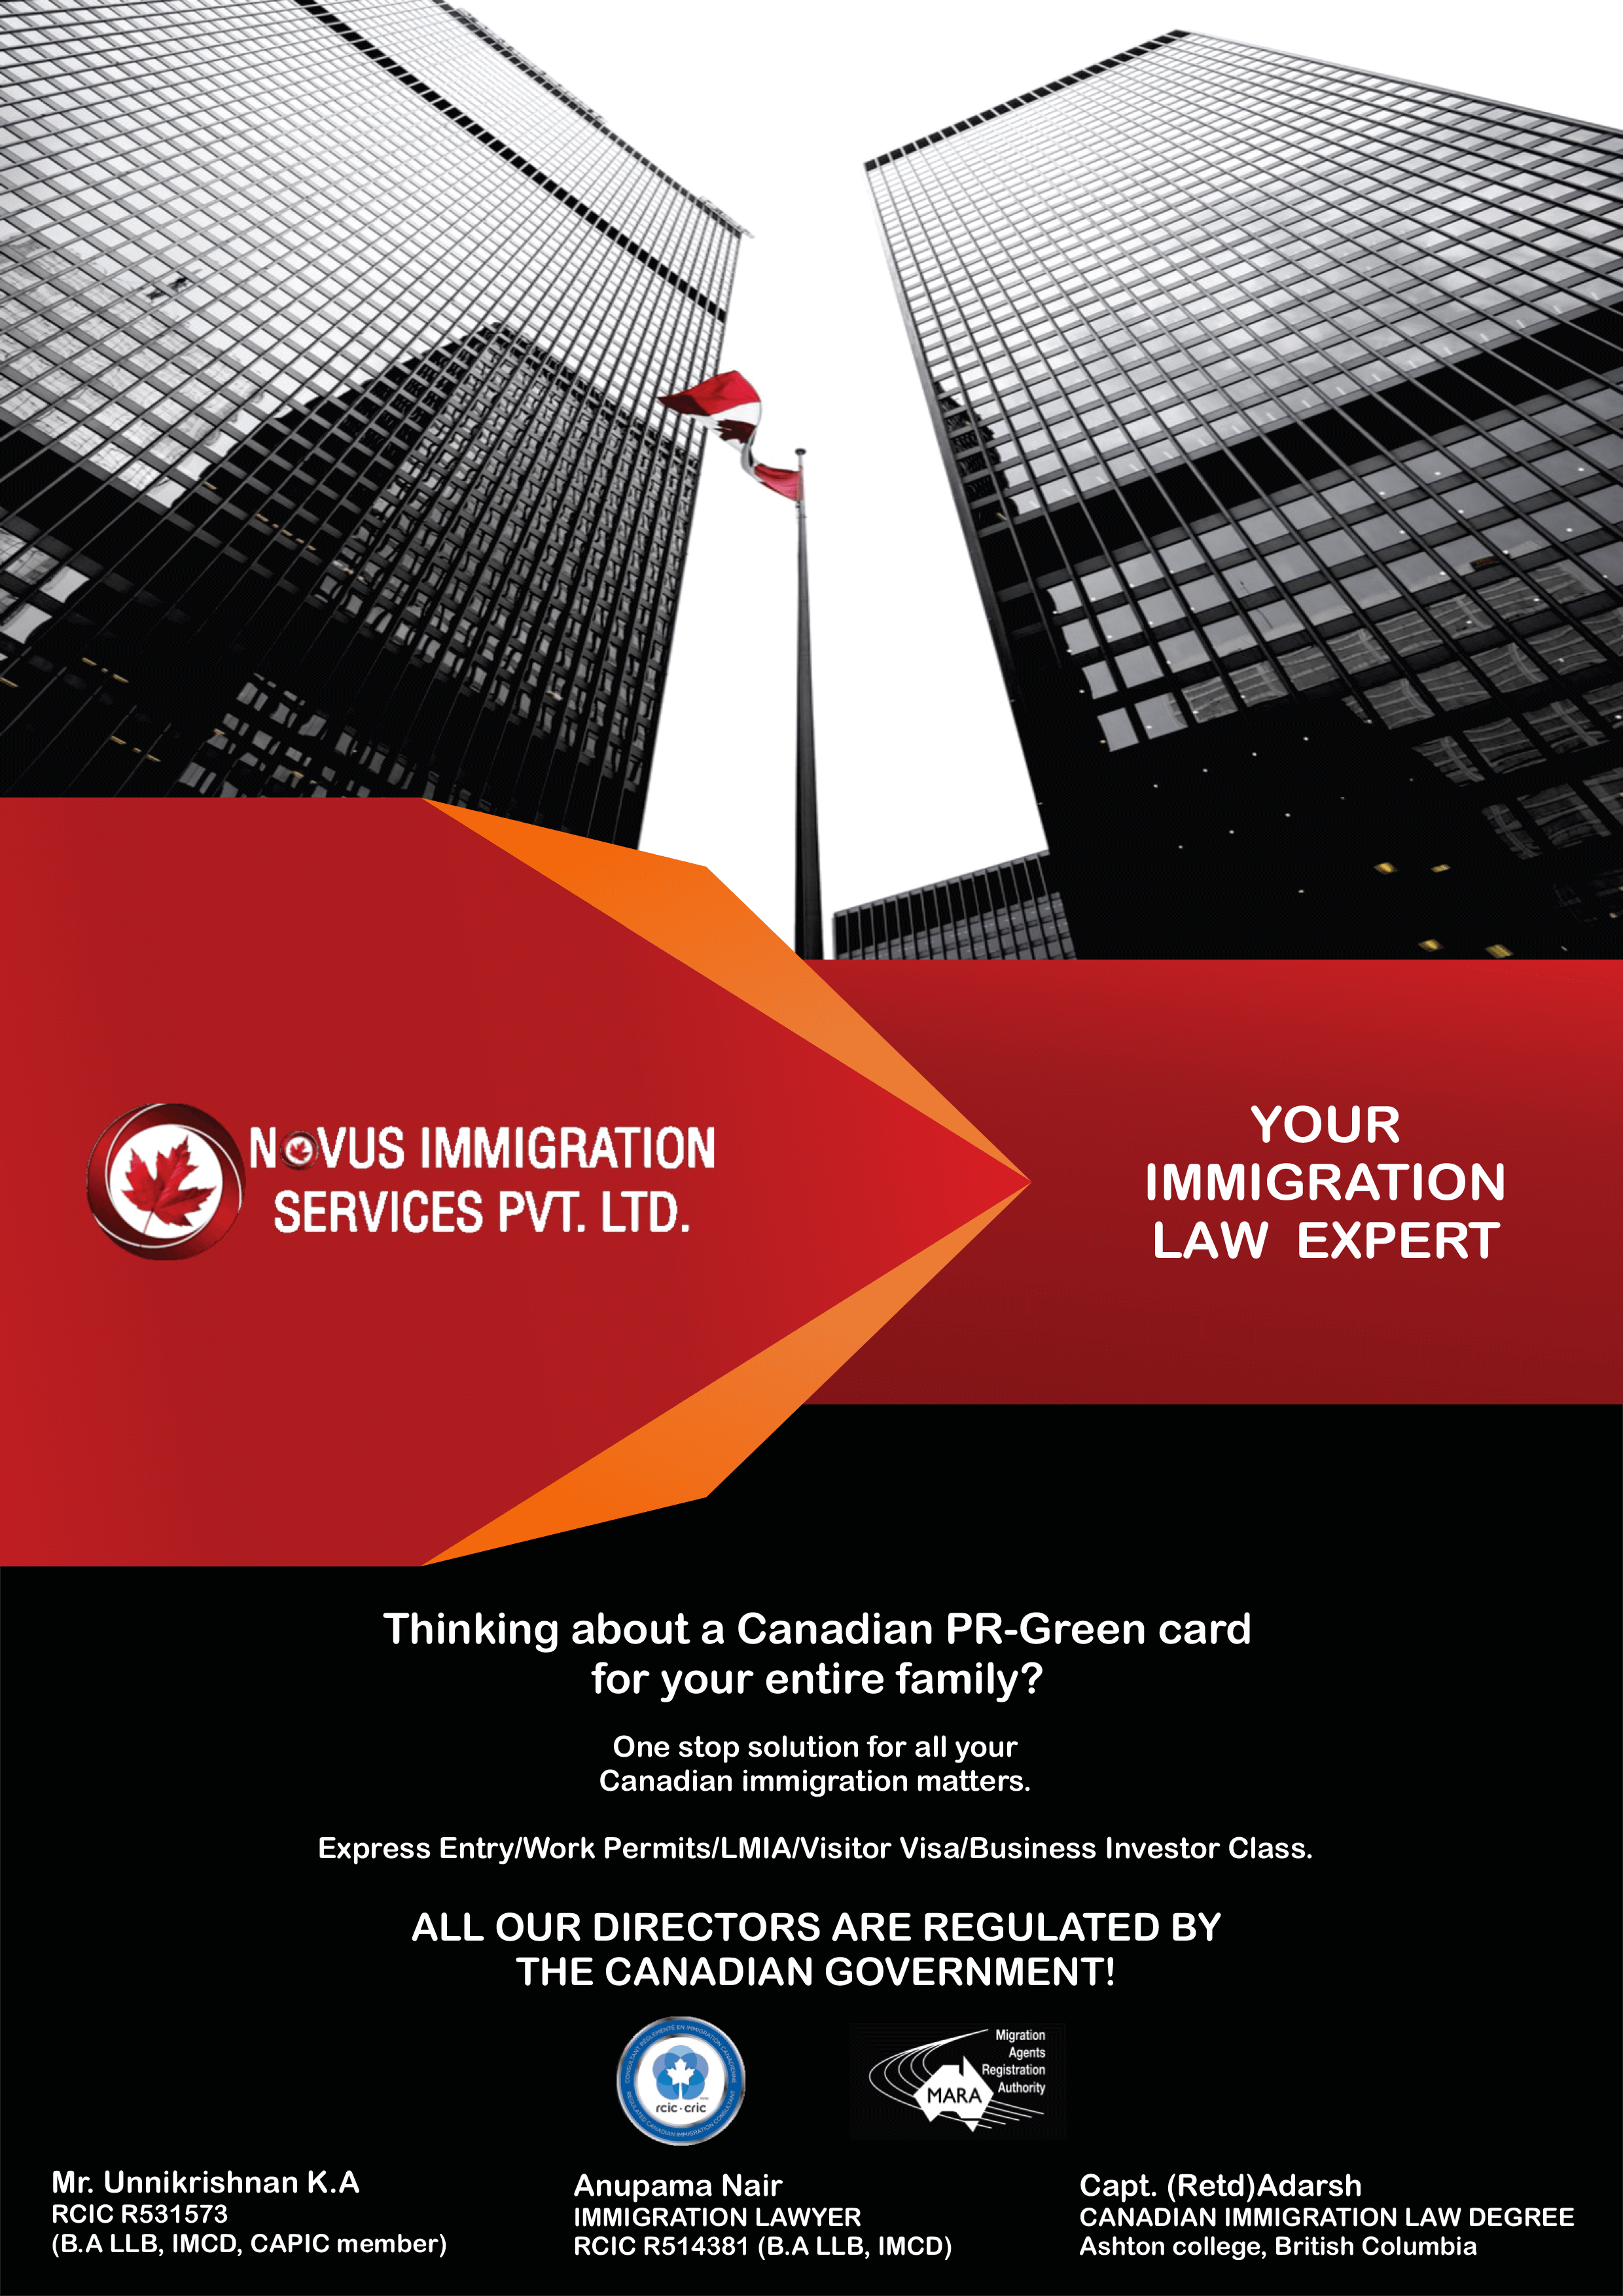 Immigration Consultants in Vancouver